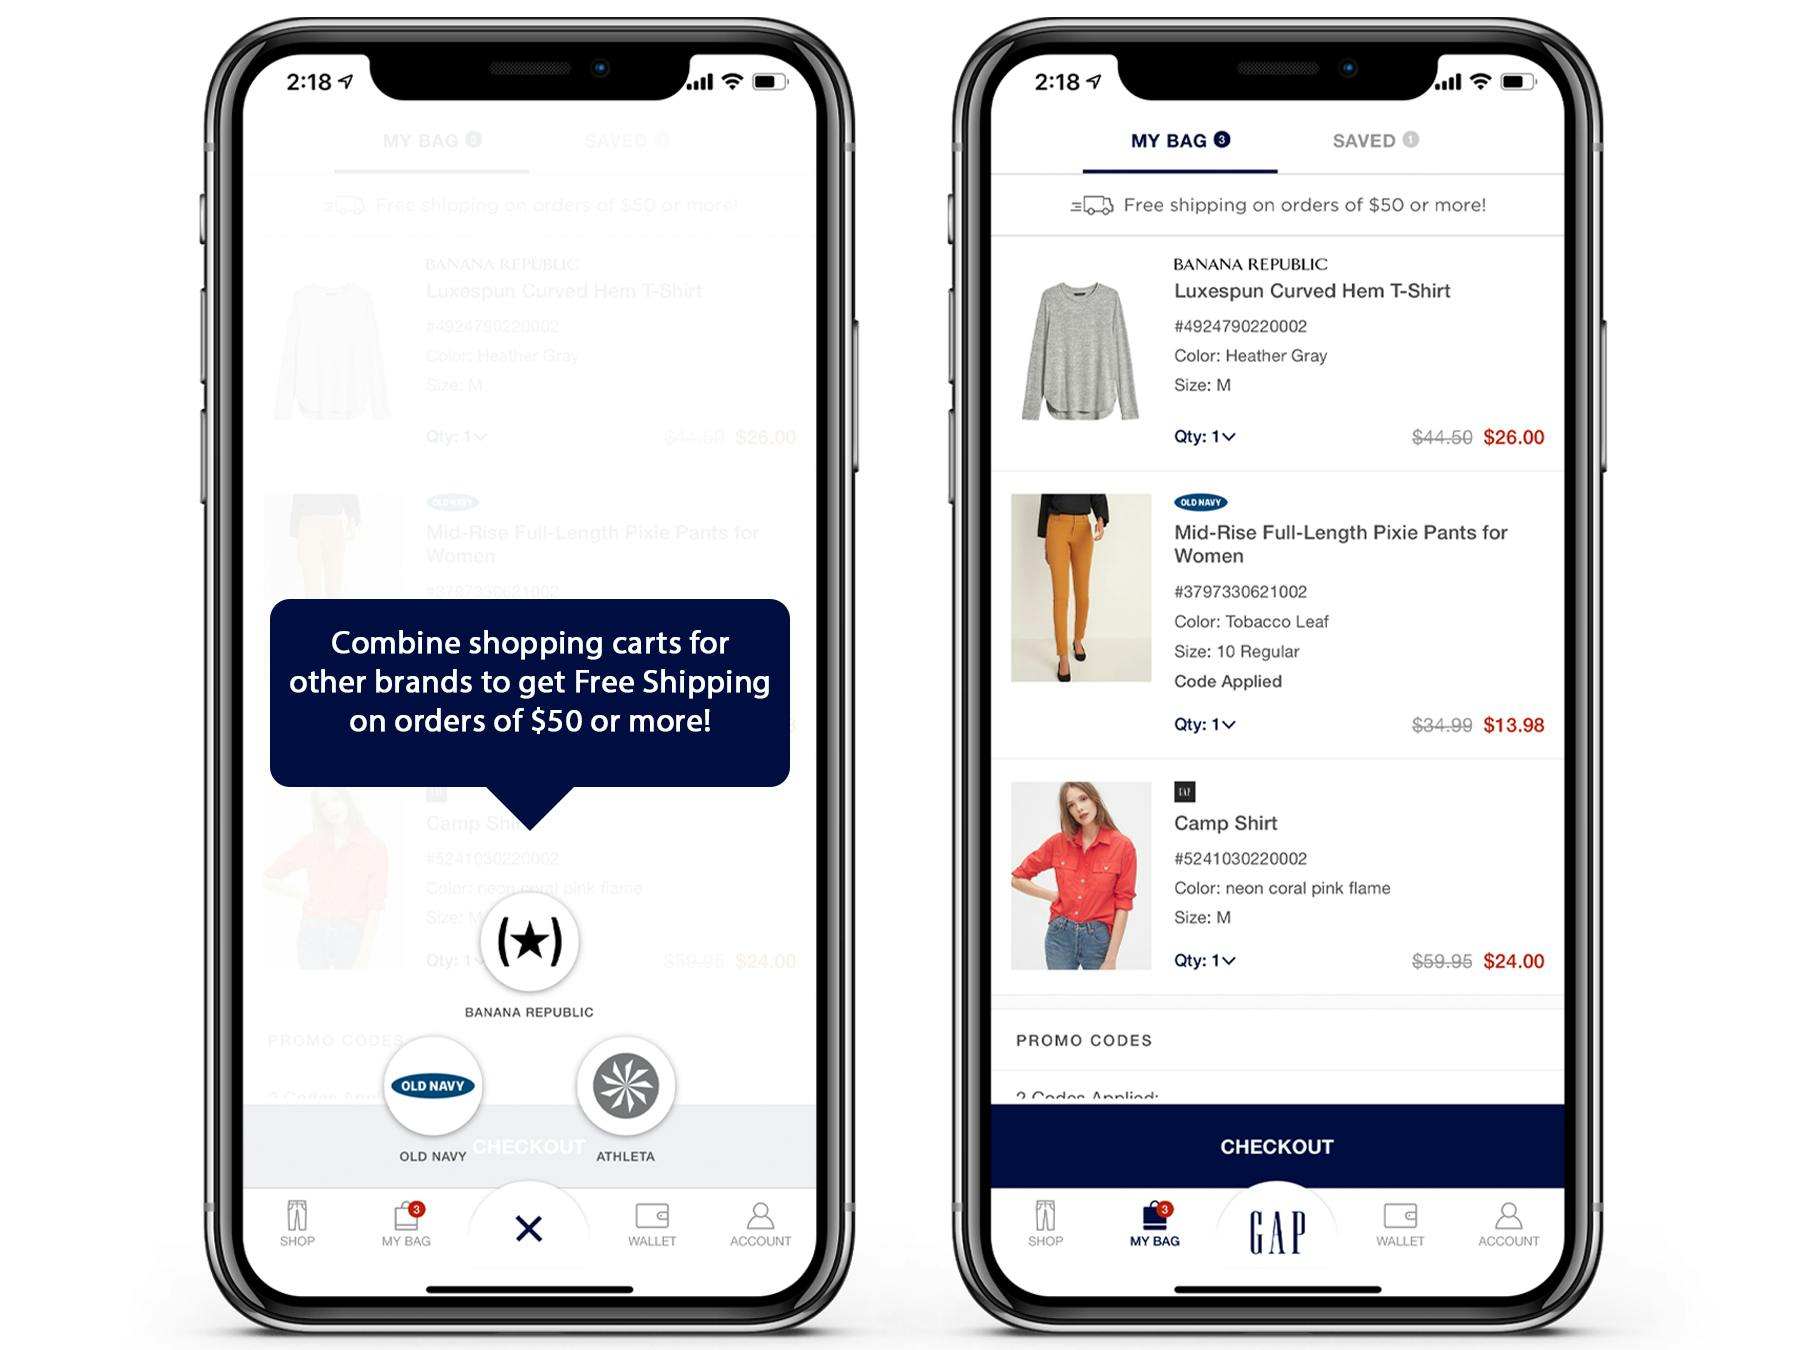 iphone screen shots for the Gap app. One displaying how to switch between brands on the app and another of an online shopping cart full of different brand items.